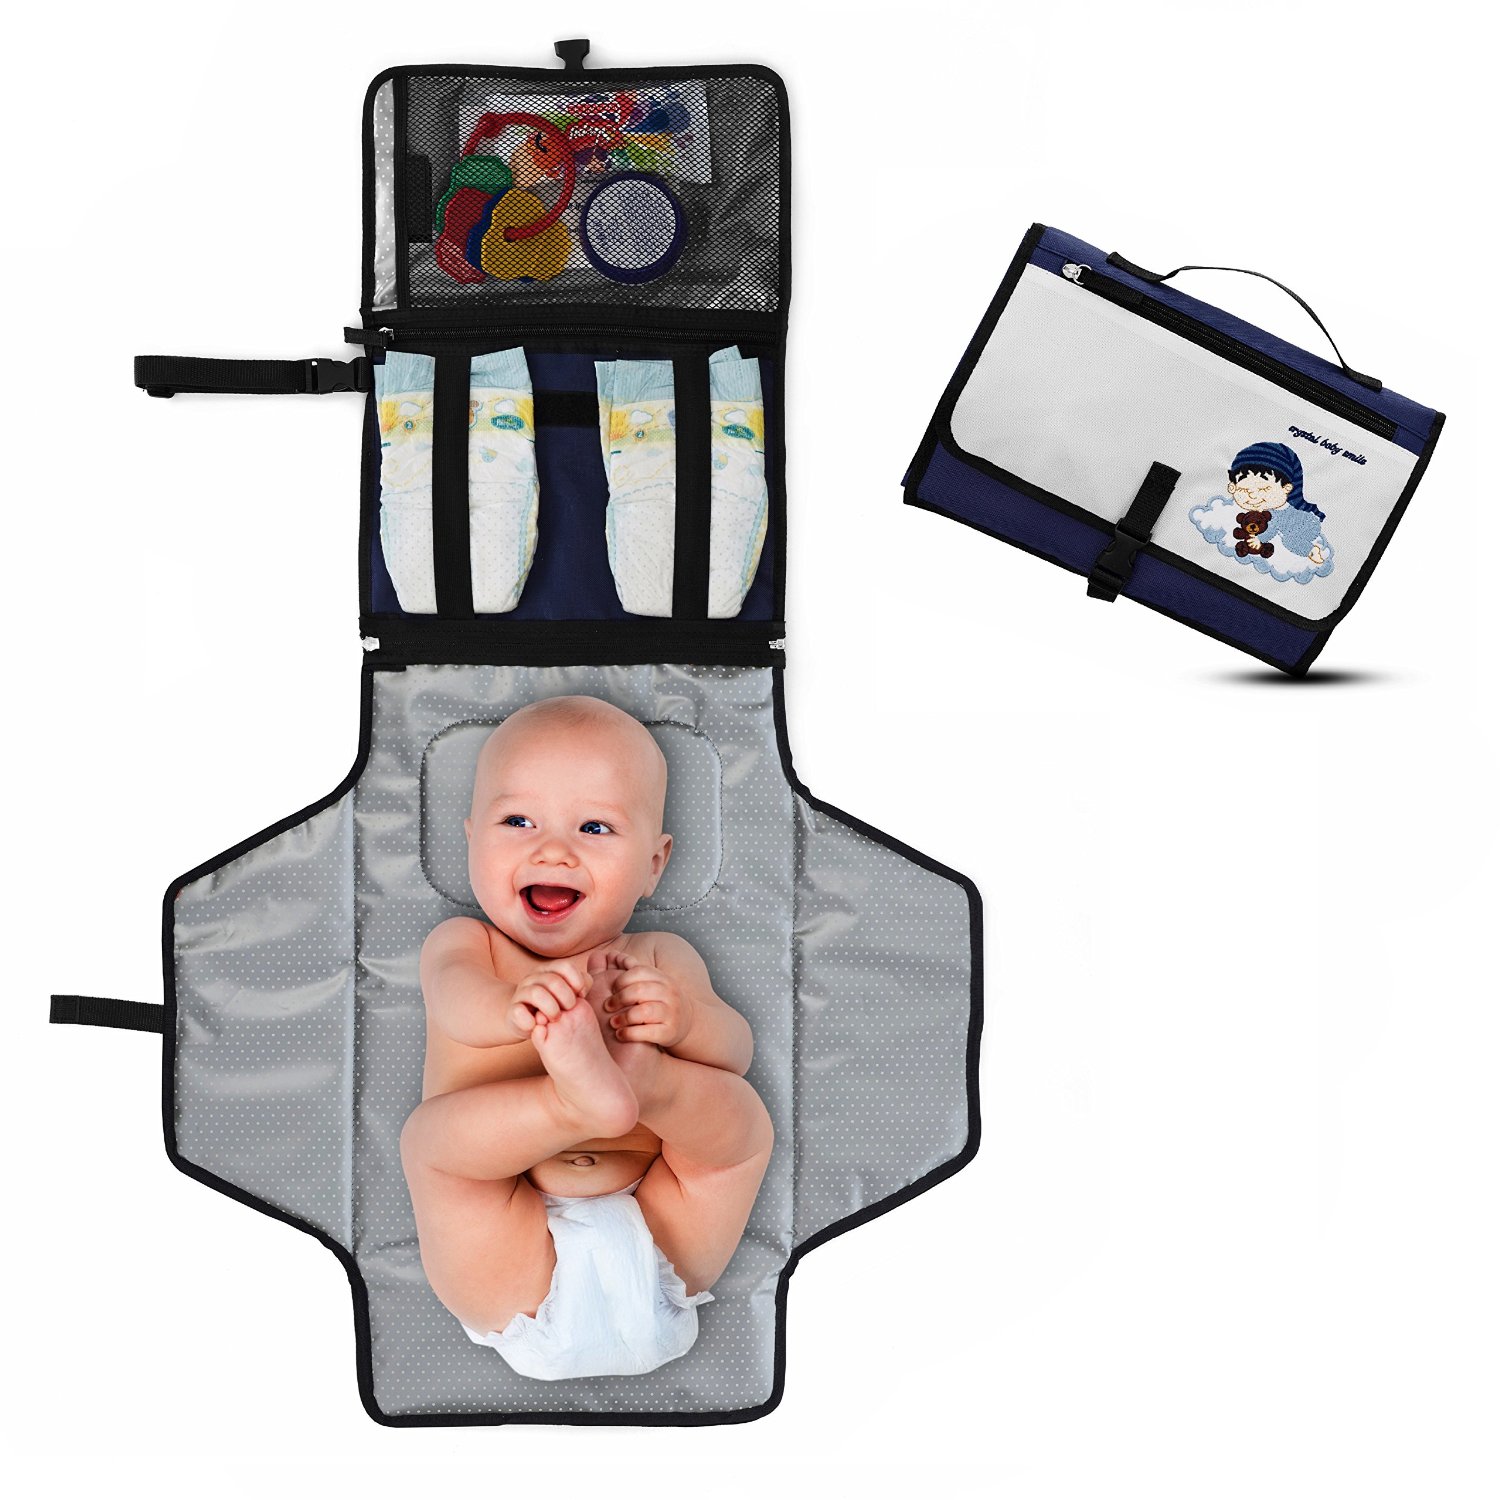 Great cheap baby shower gift idea - portable diaper changing station.